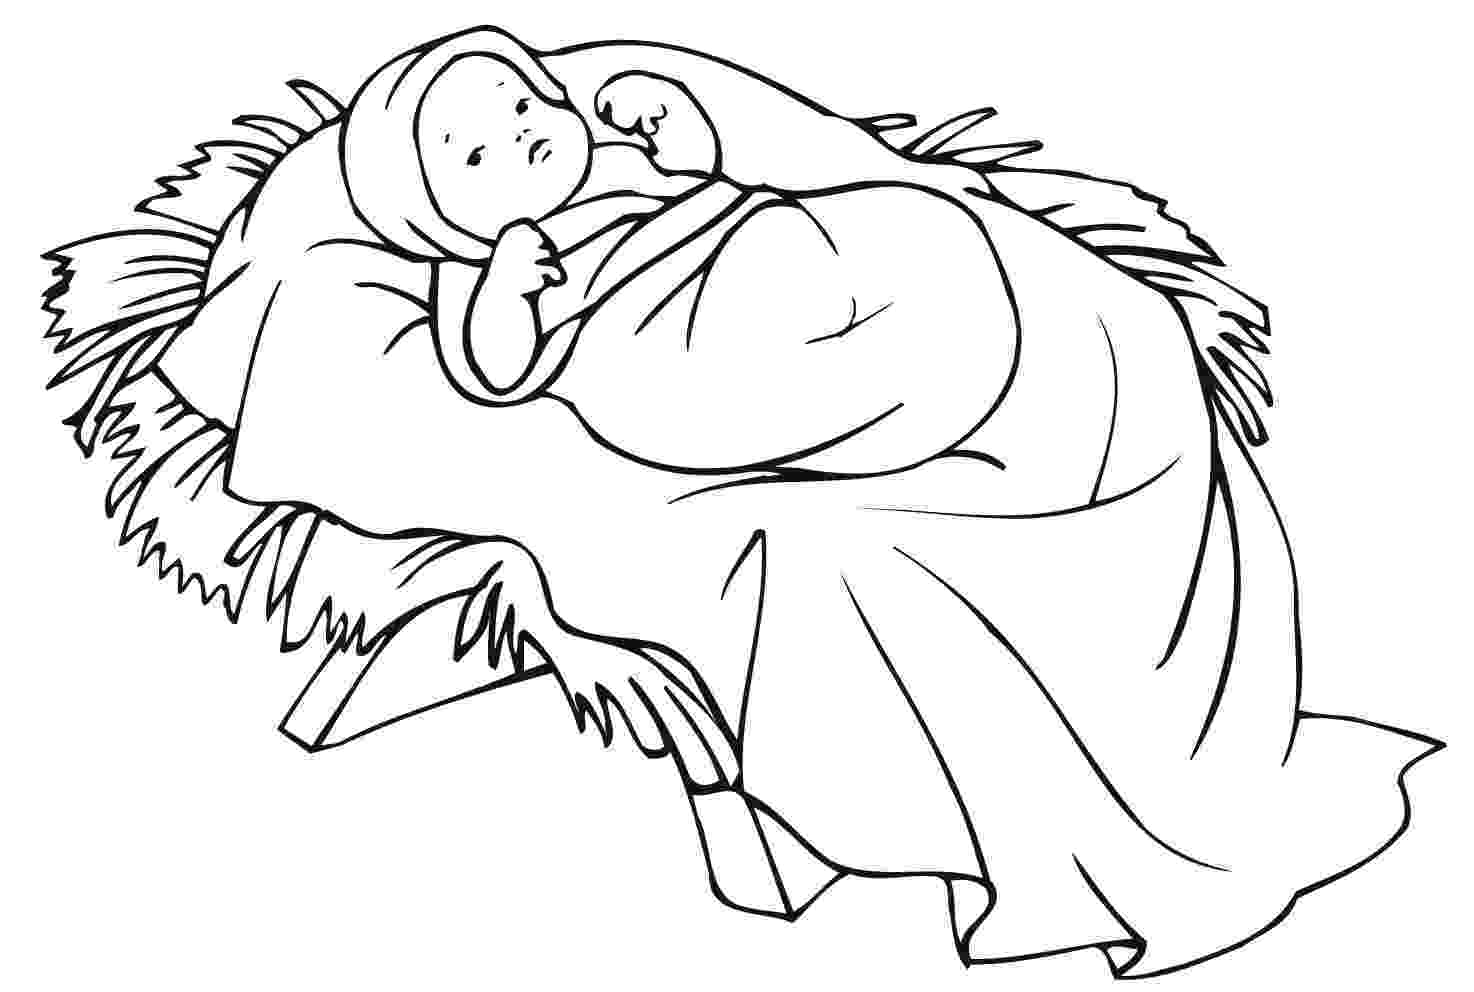 coloring picture of baby jesus in the manger baby jesus born in a manger coloring page free printable manger of jesus baby coloring picture the in 